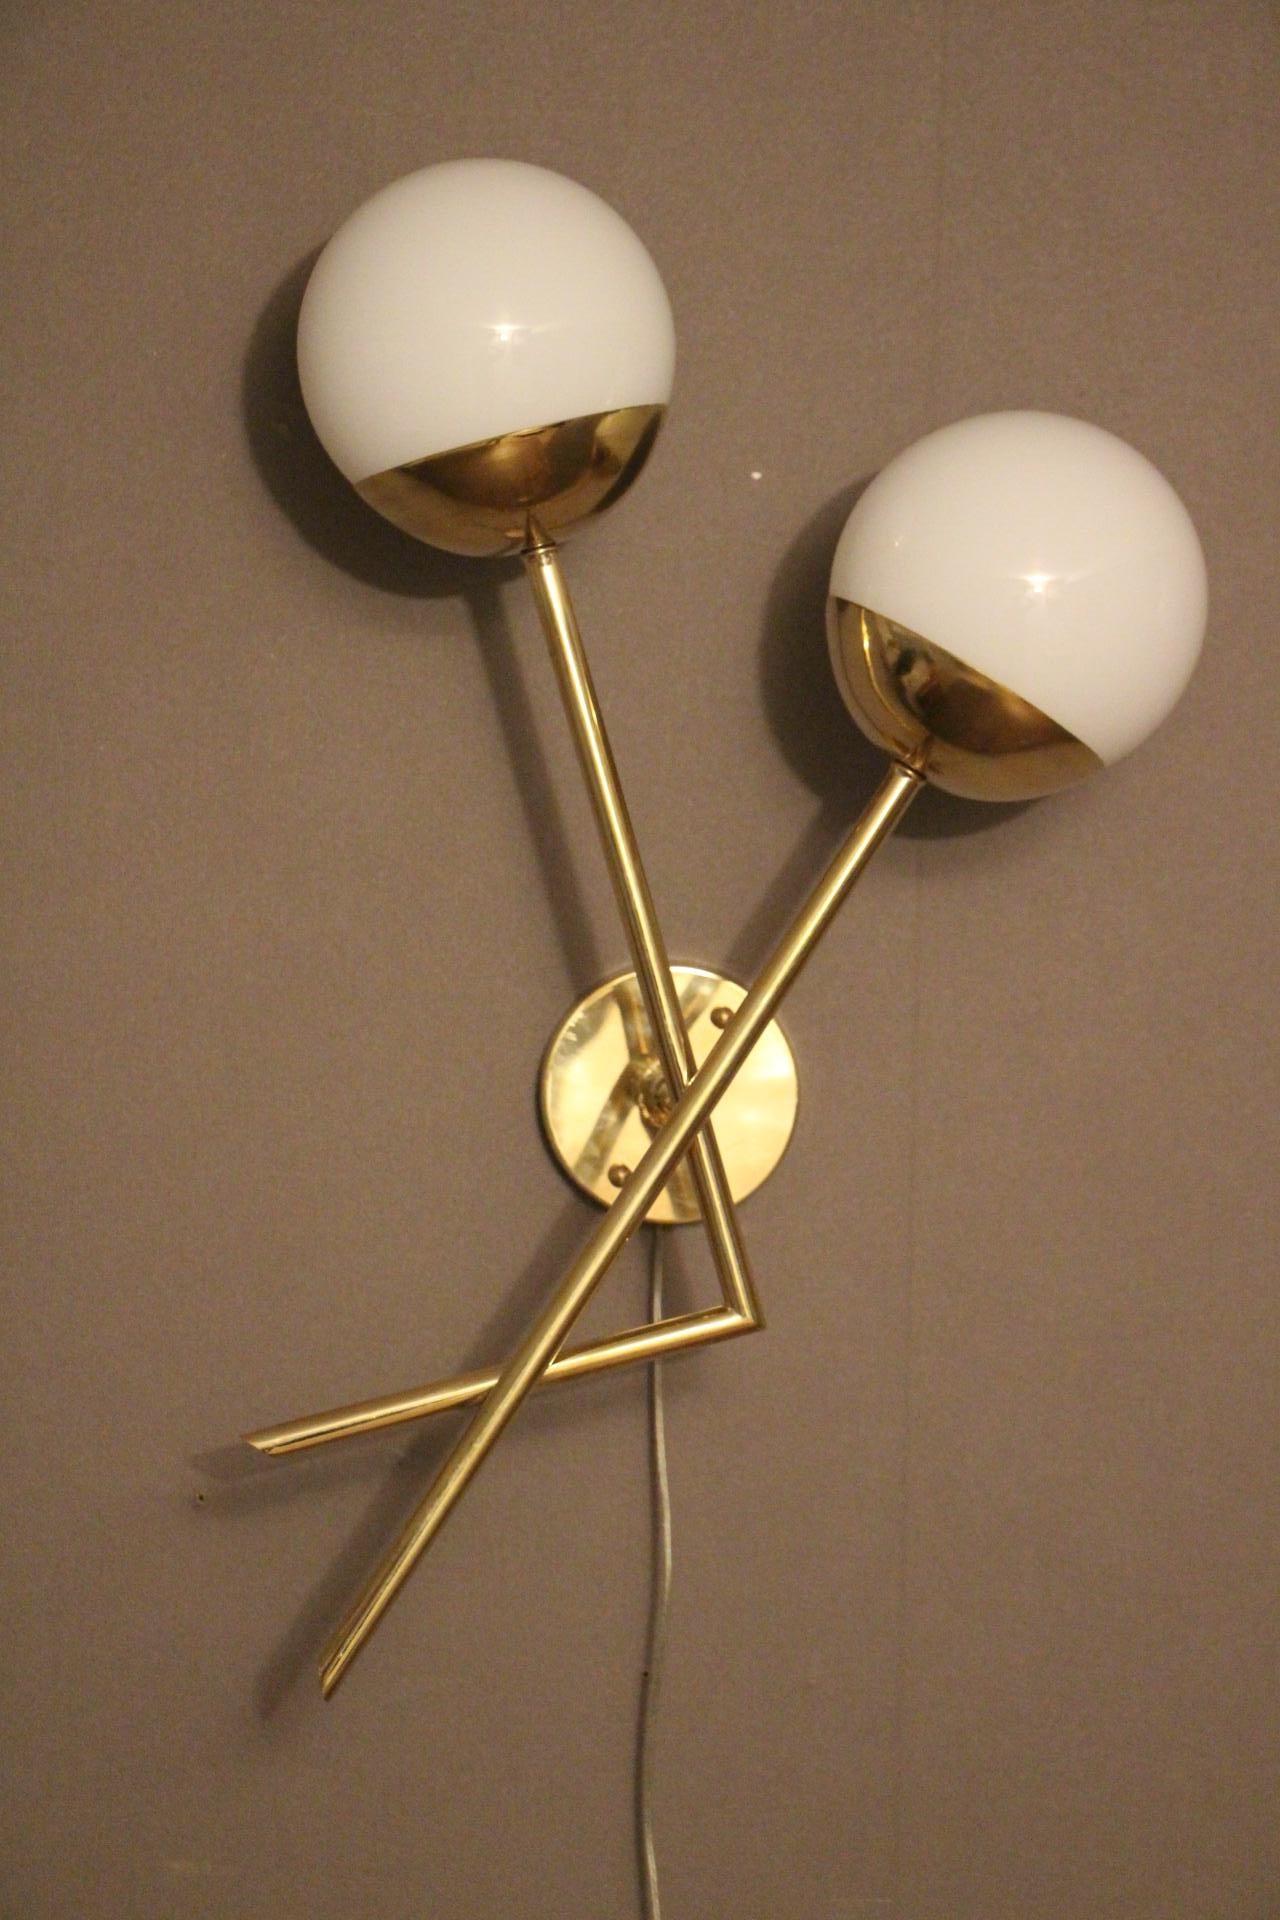 This pair of sconces features brass structure and 2 white Murano glass globes. It is very simple and very elegant at the same time.
It could be showcased in every distinctive interiors.
Its shape is very unusual and could match with design or mid